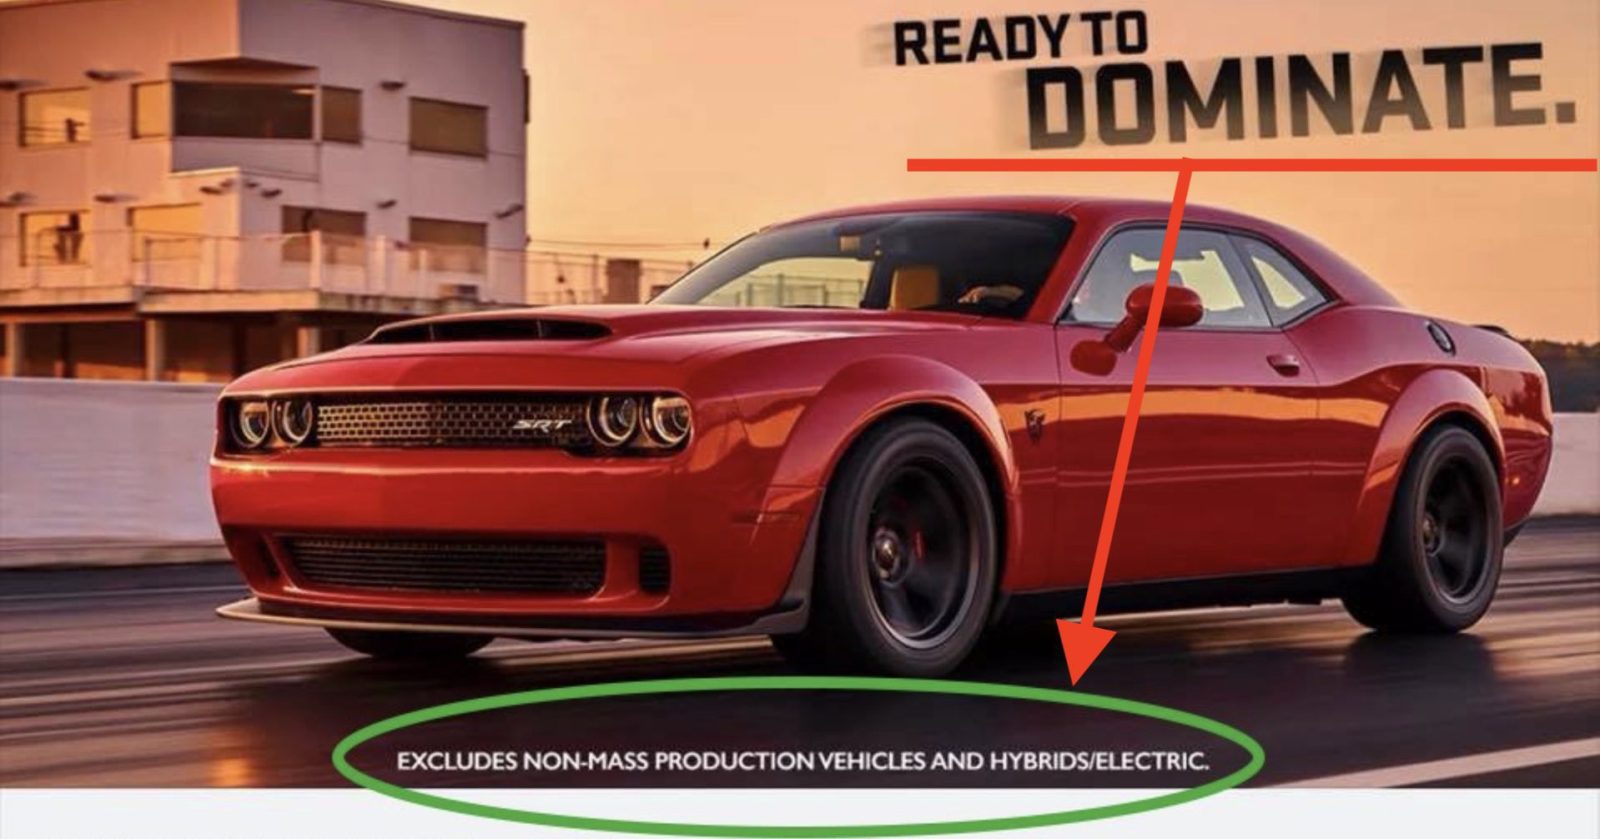 The muscle car goes electric Dodge sets 2024 end date for gas Chargers